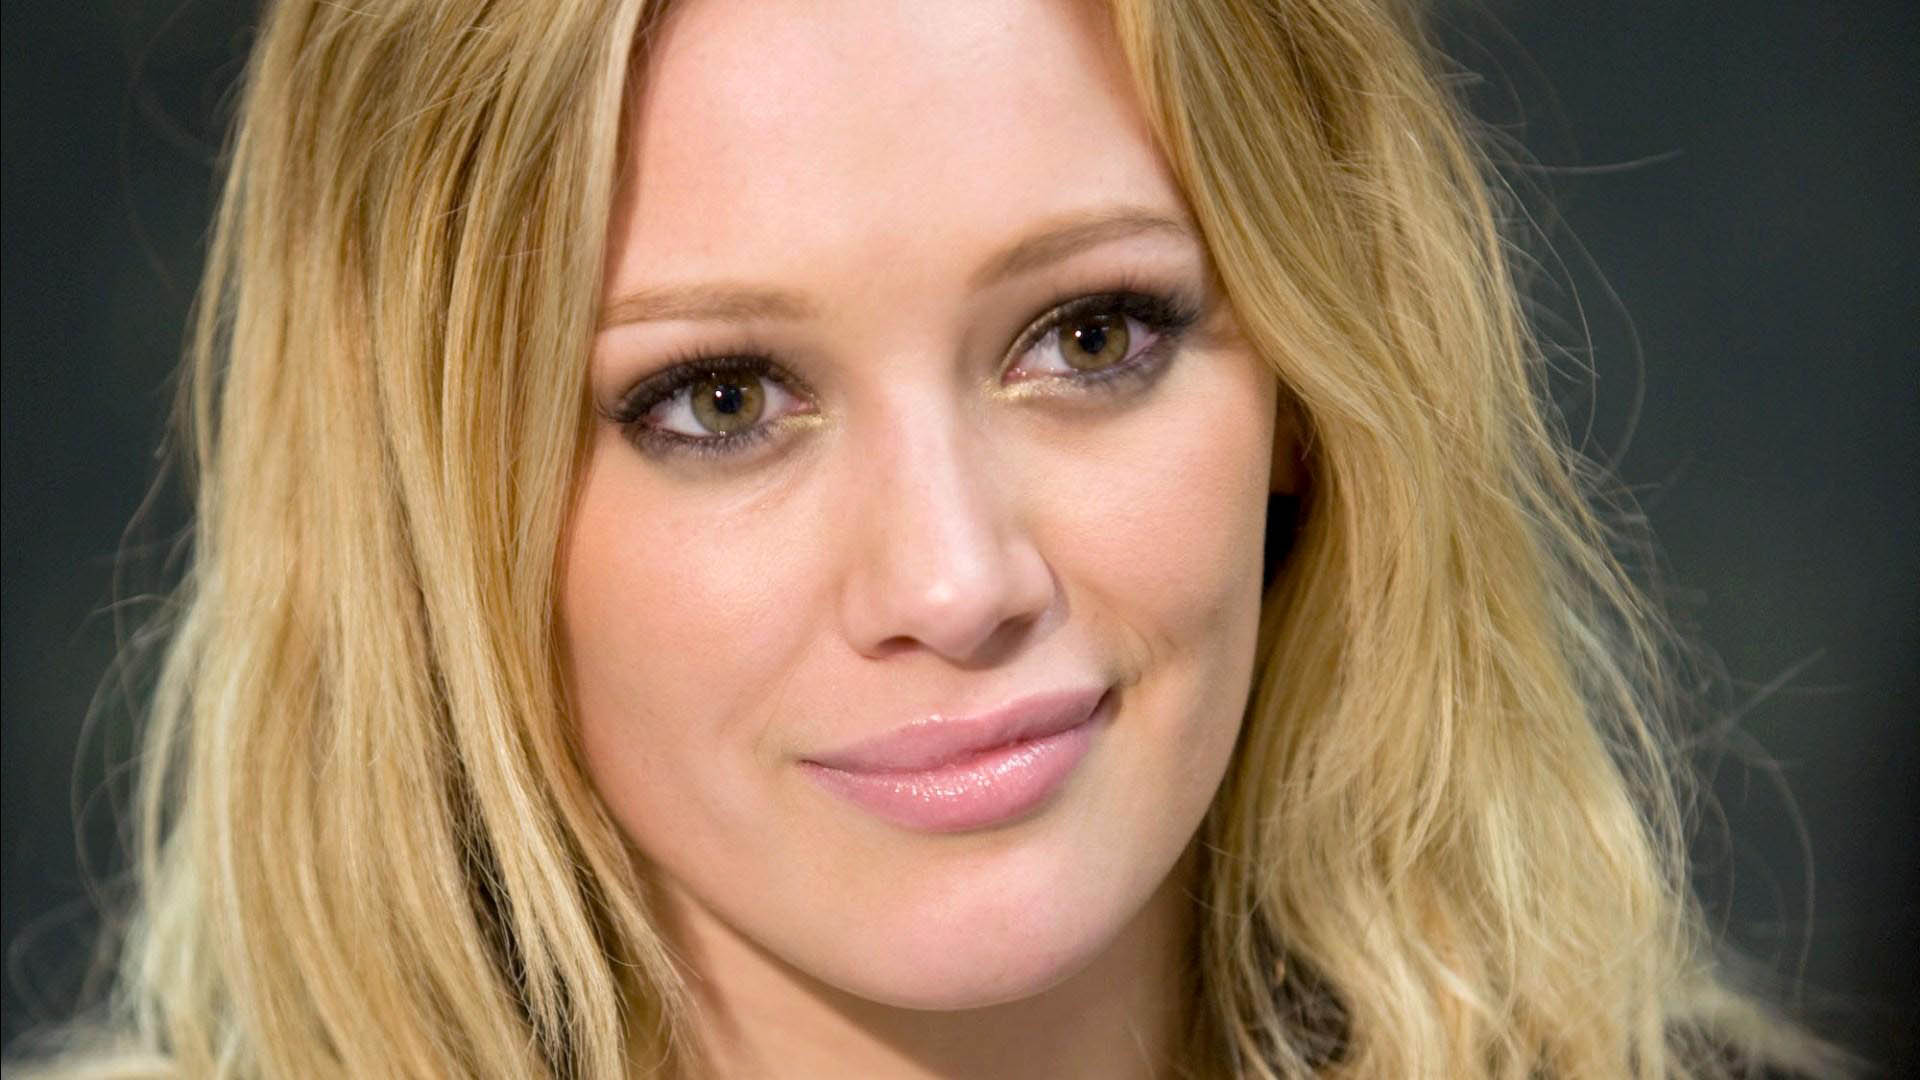 Wallpapers smiling girls Hilary Duff on the desktop